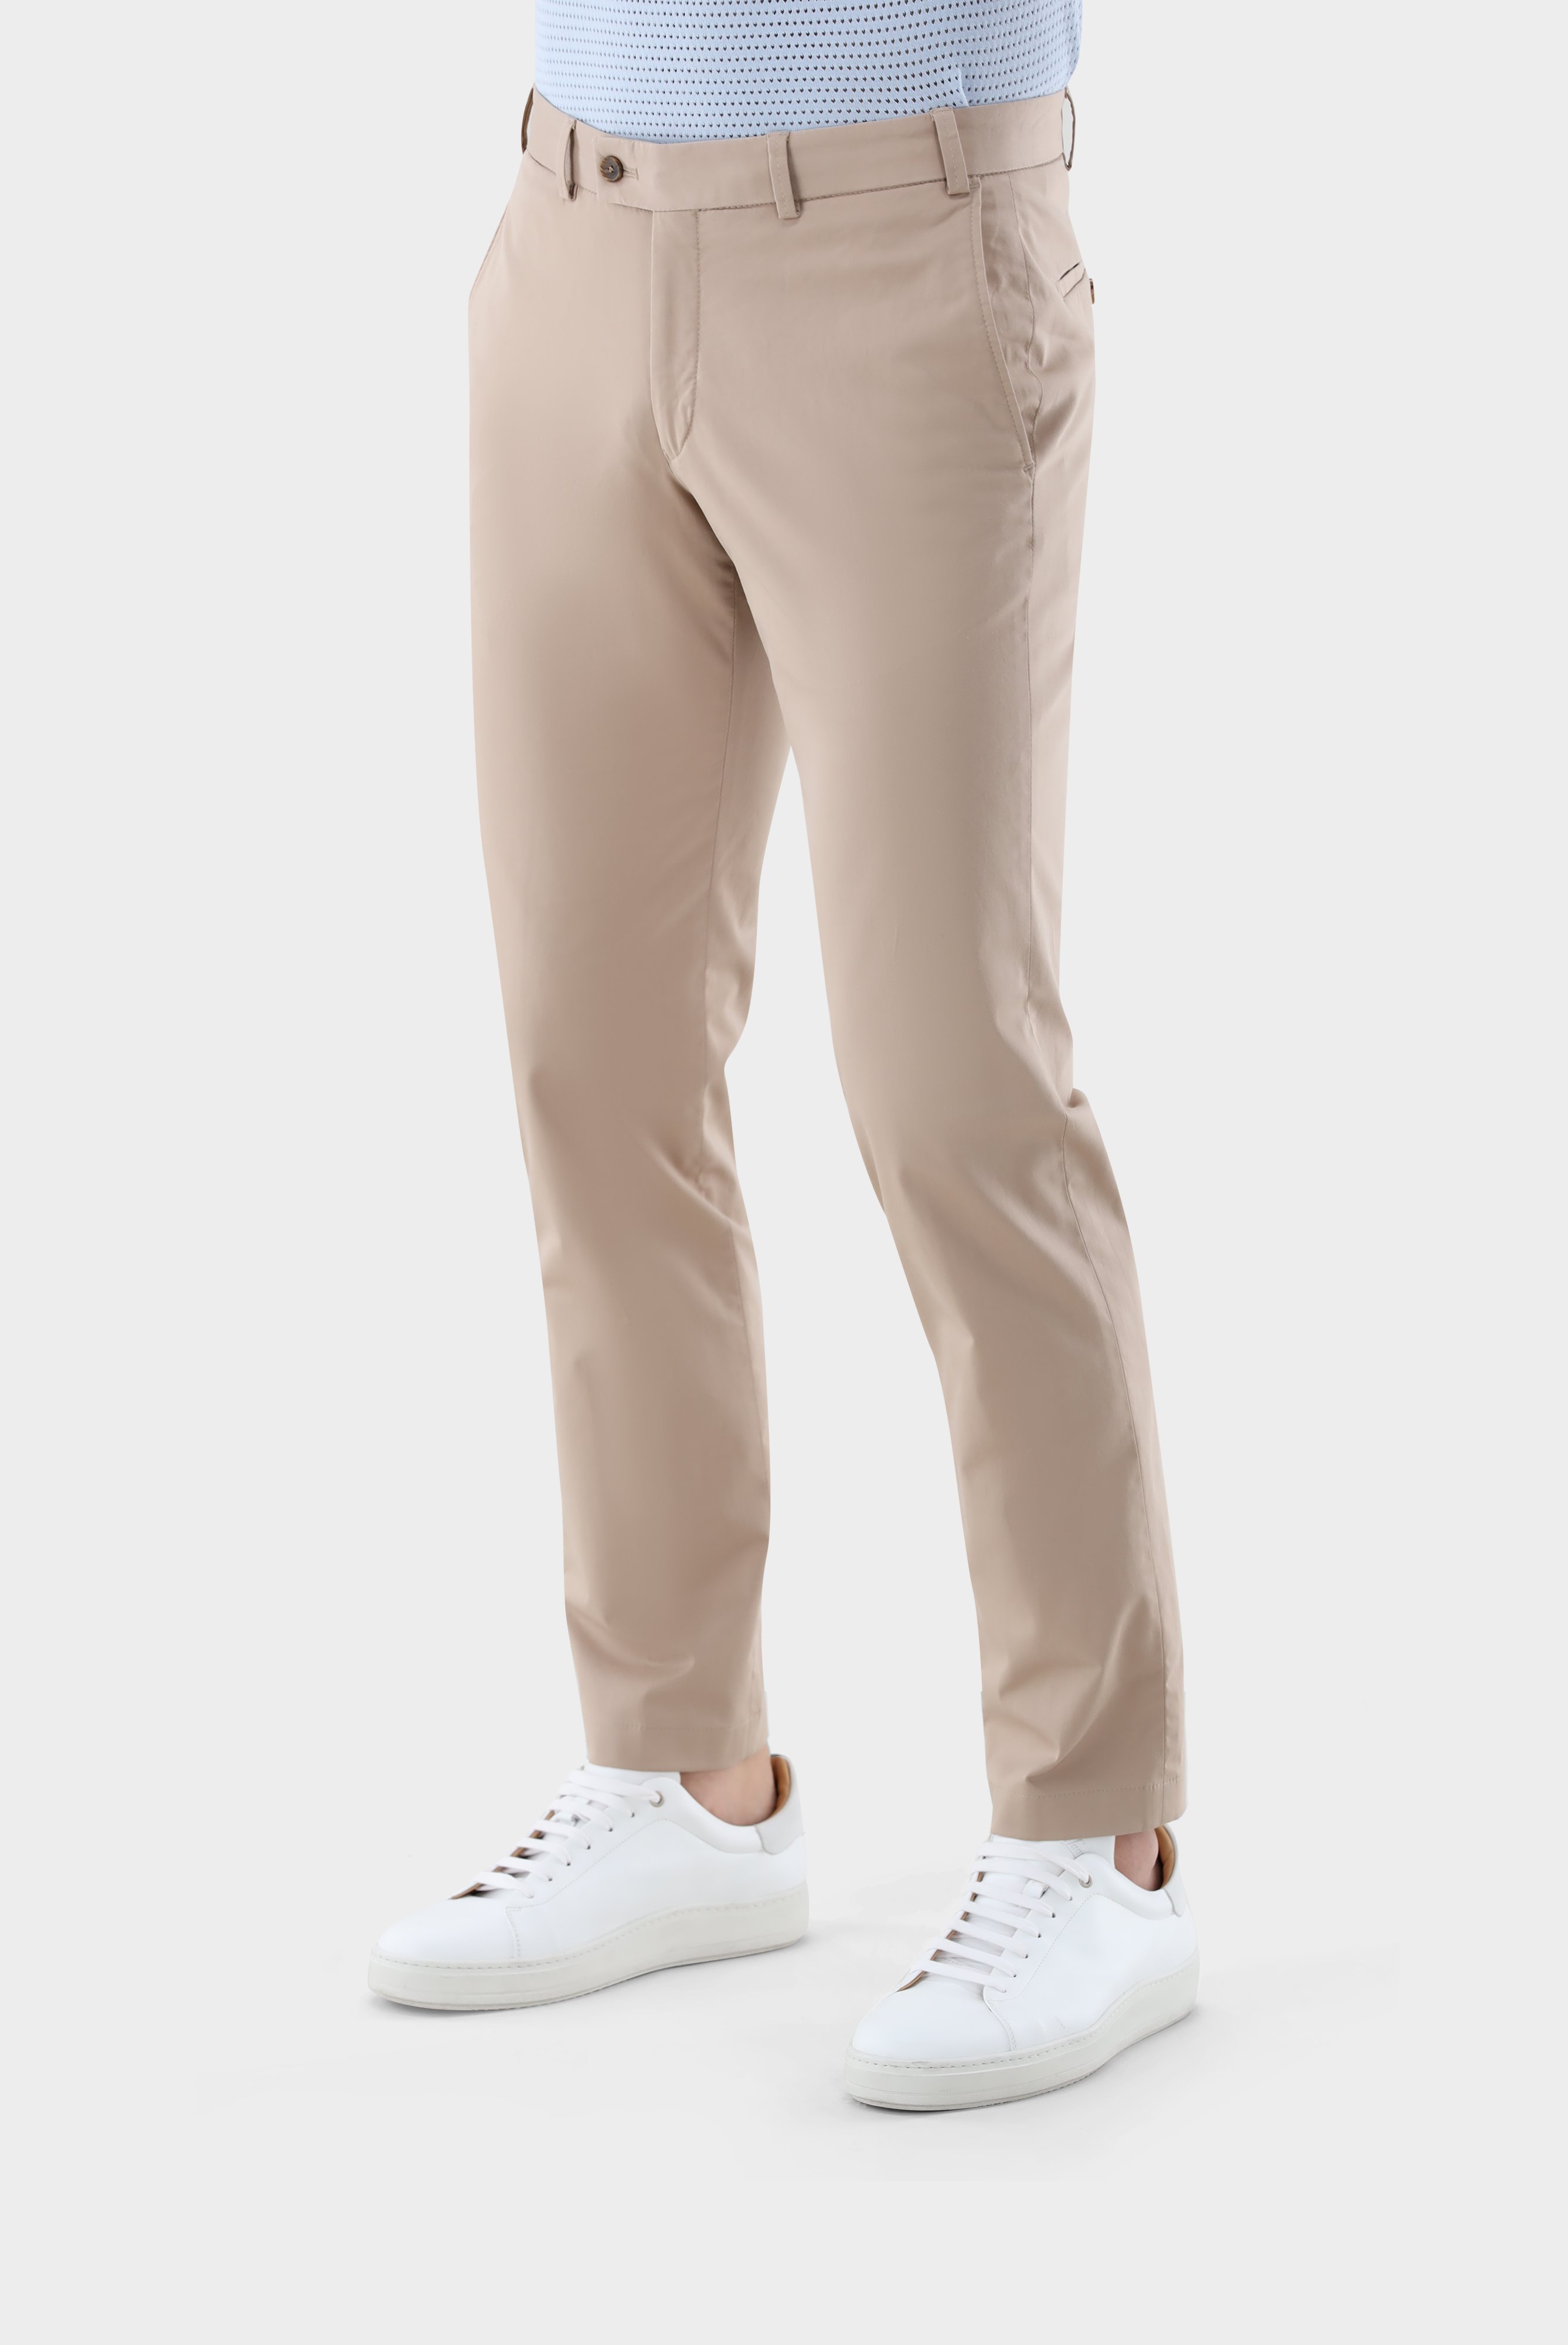 Jeans & Trousers+Stretch Chino Trousers+80.7858..J00151.140.44